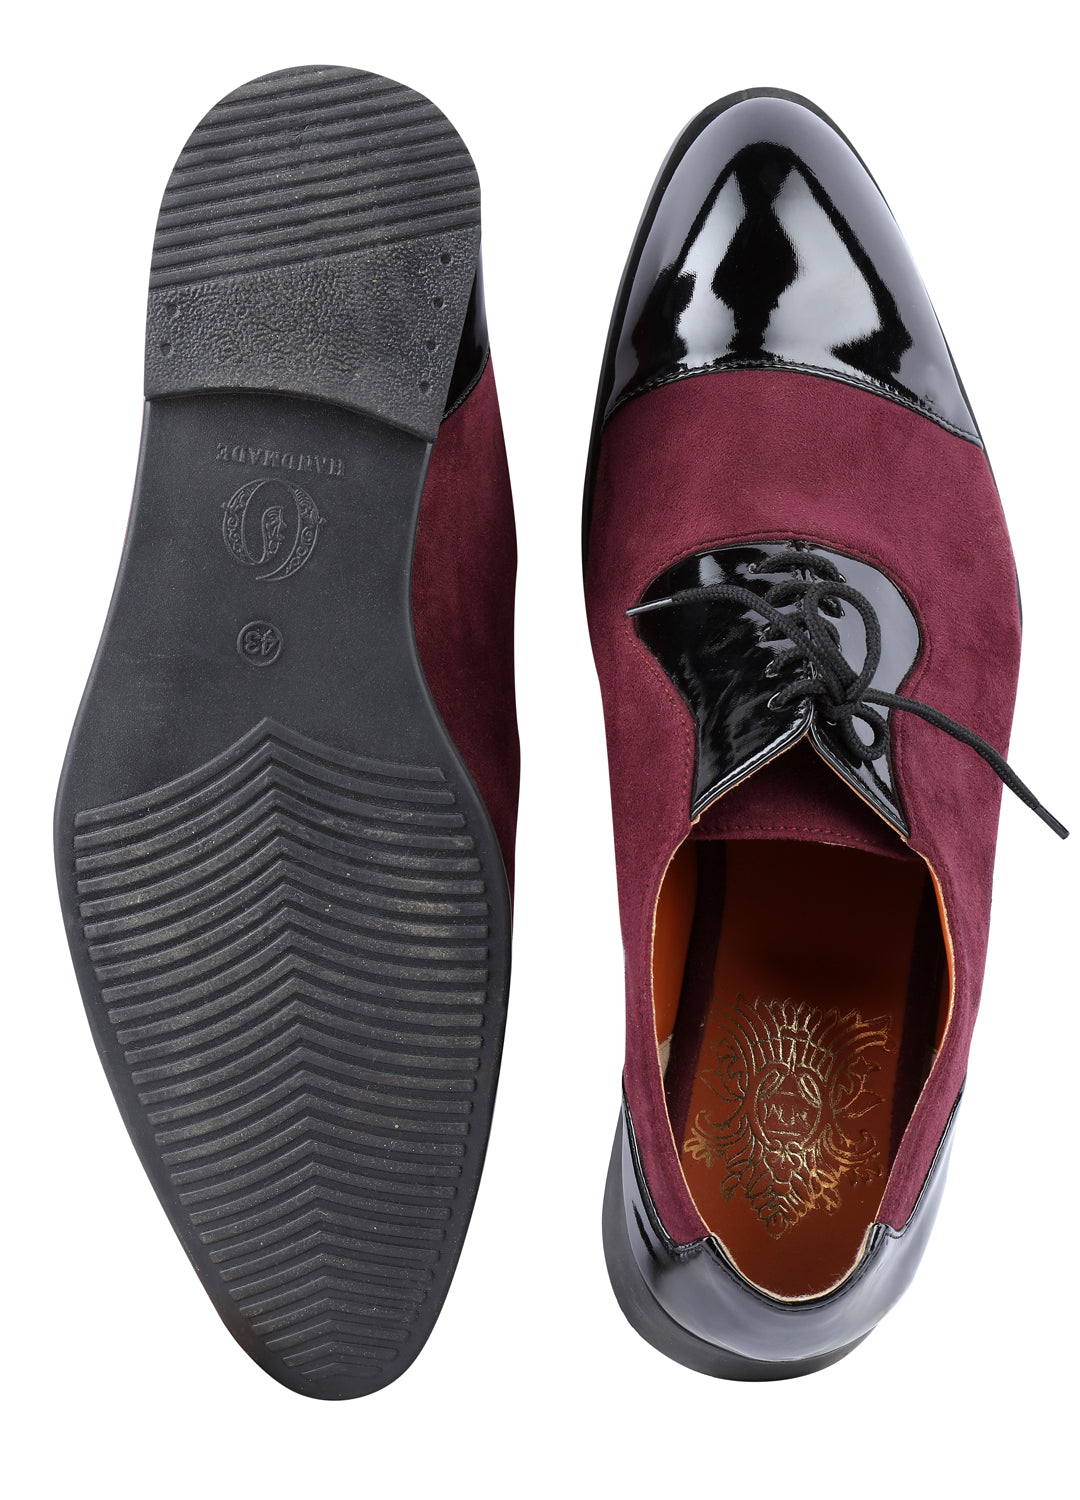 Wine Handcrafted Semi-Leather Shoes